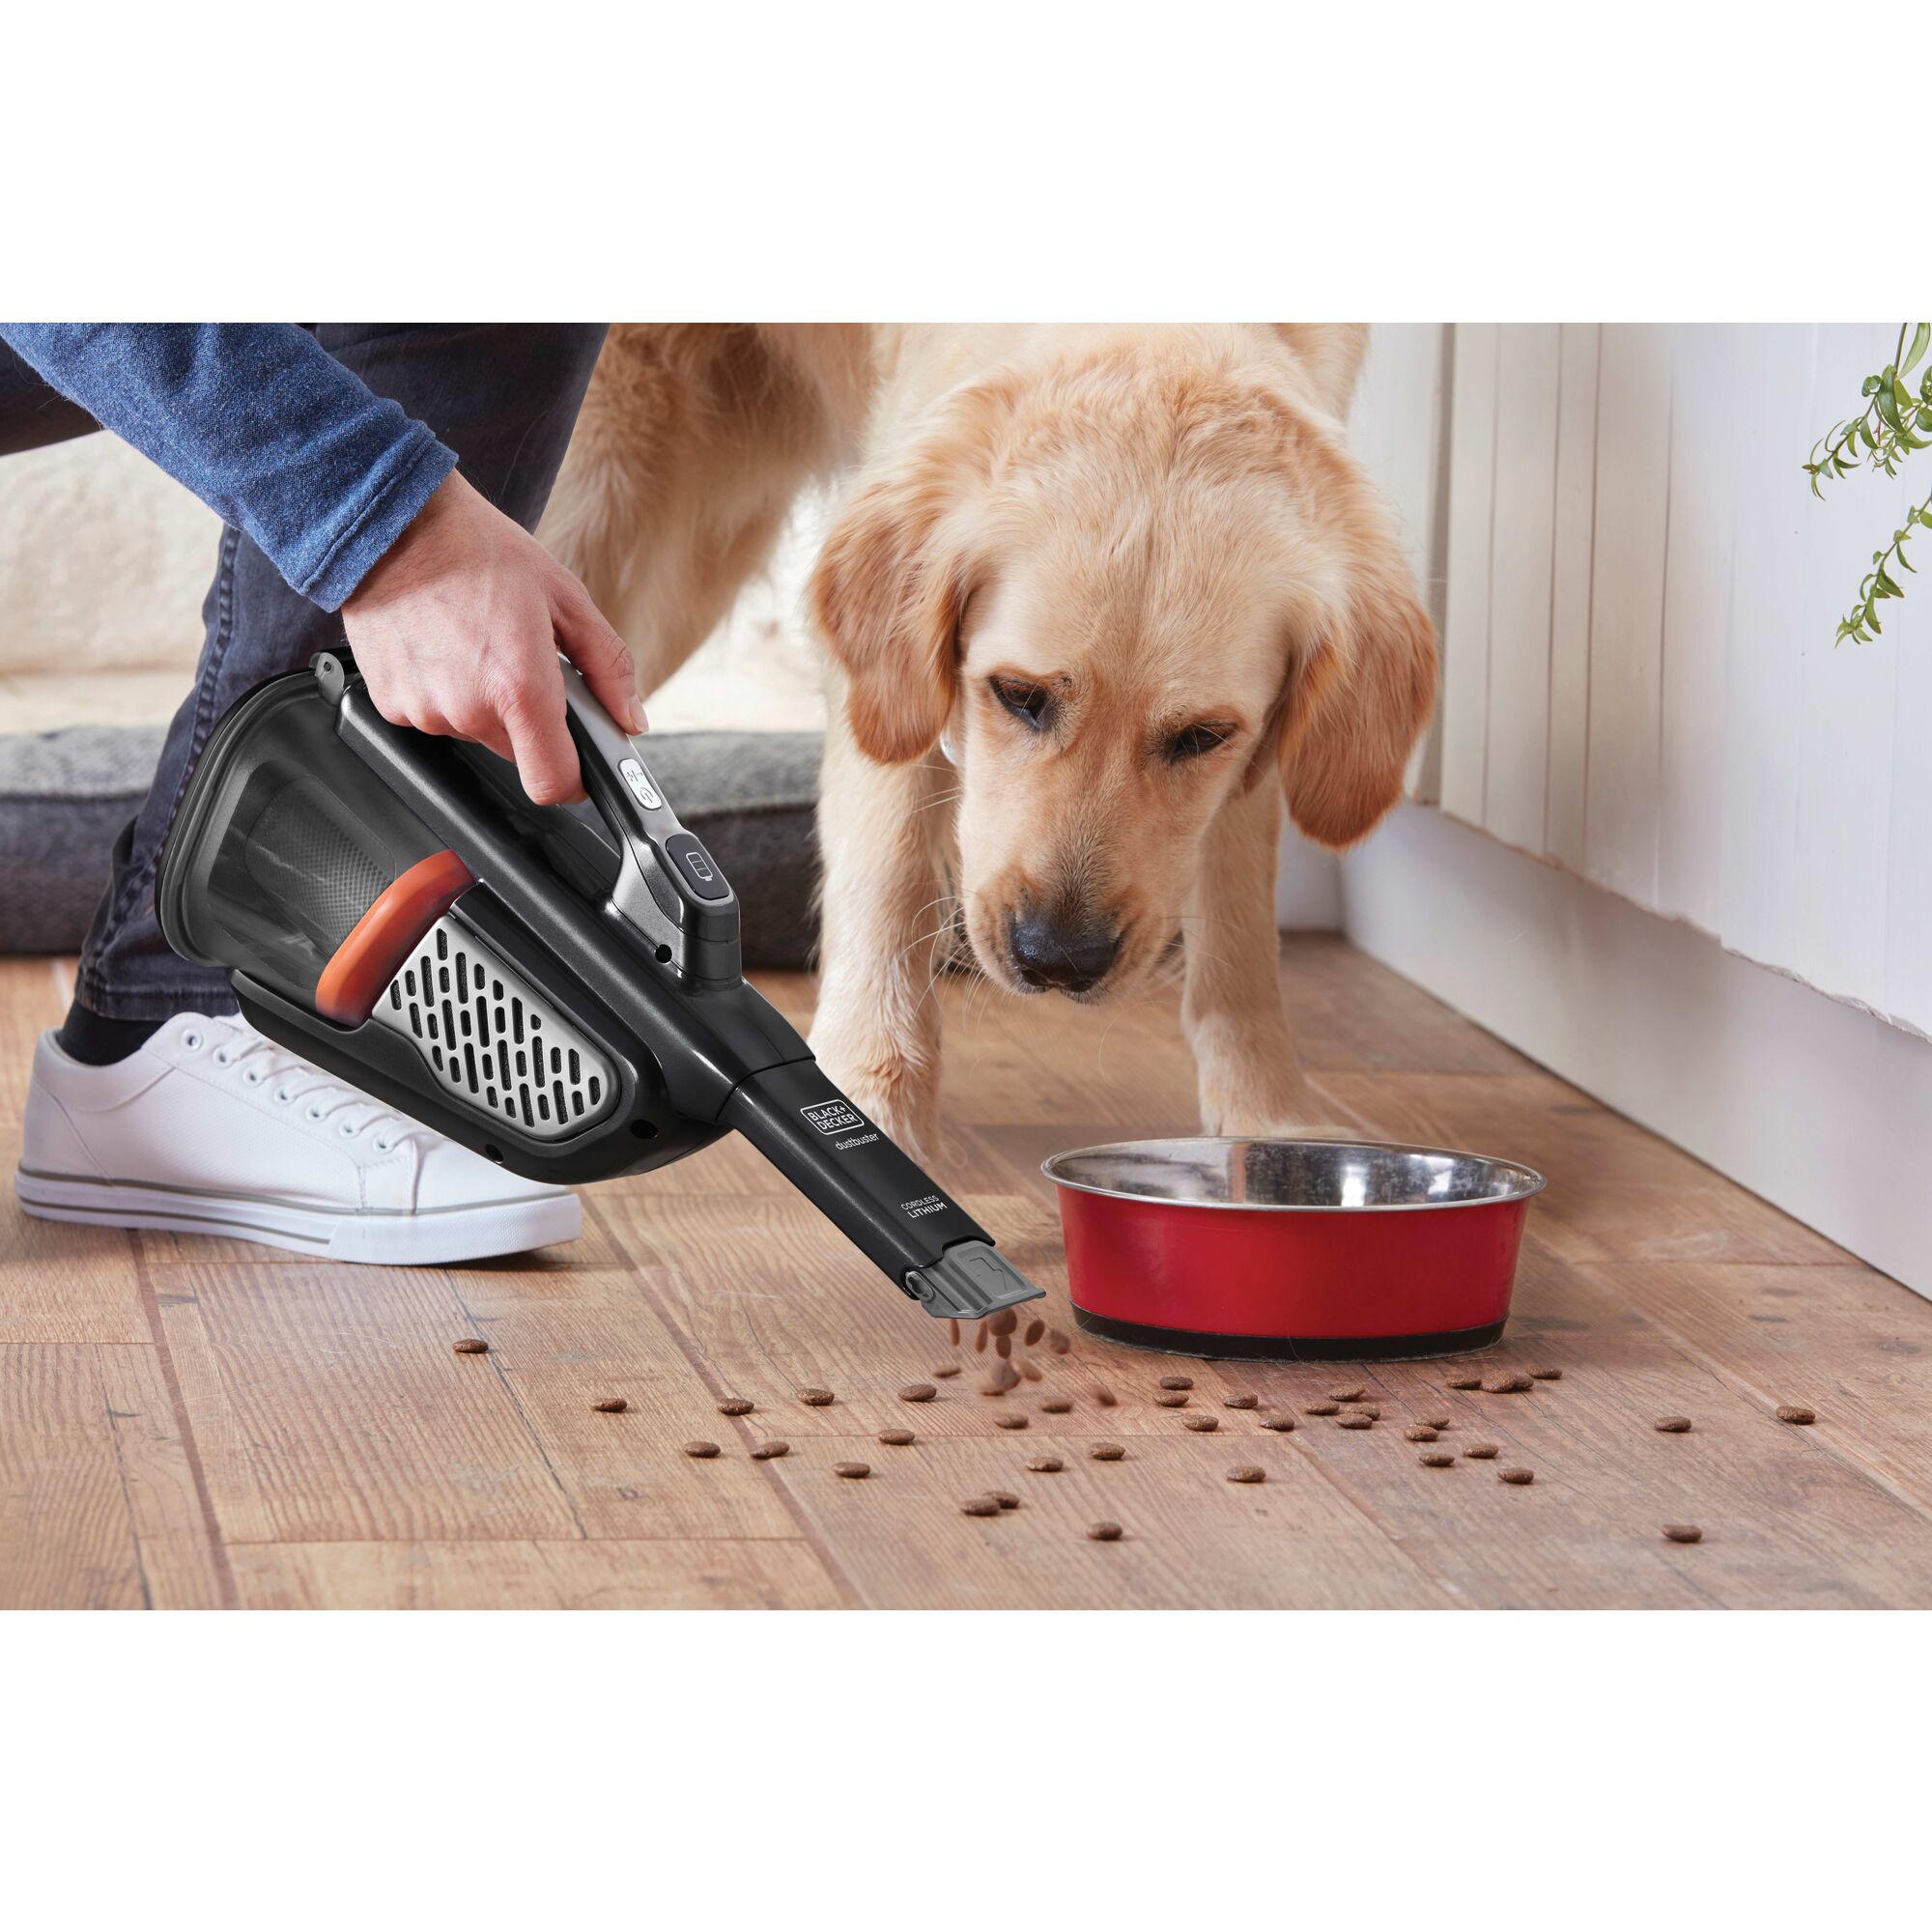 20 volt MAX dustbuster Advanced Clean cordless hand vacuum being used to clean dog food spillage on wooden floor.